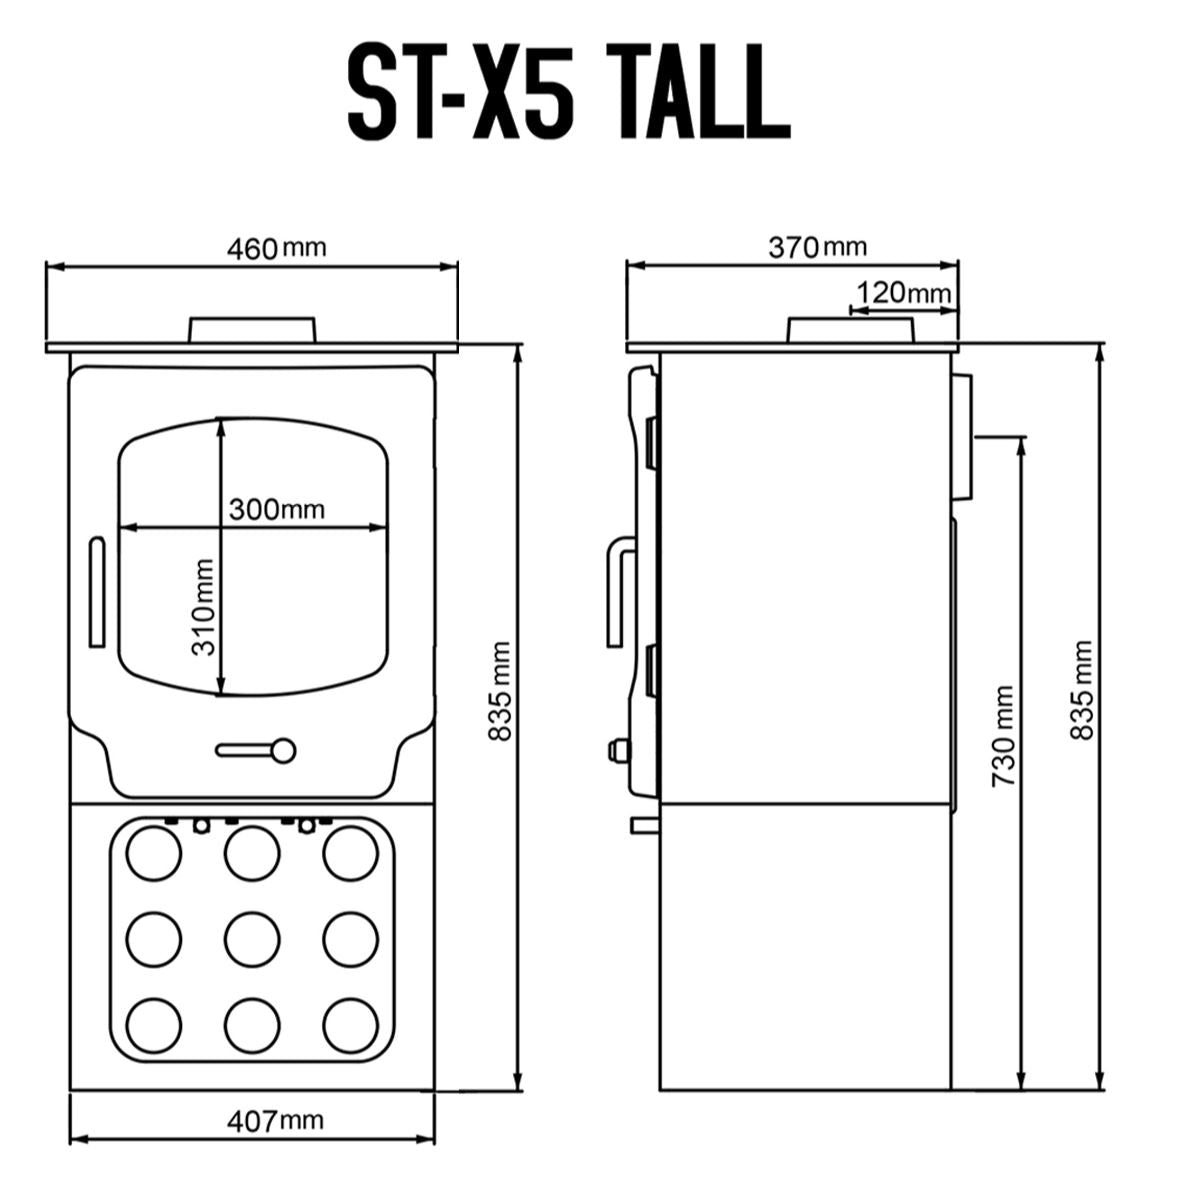 Dimensions and specifications for the ST-X5 multi fuel / wood burning stove.